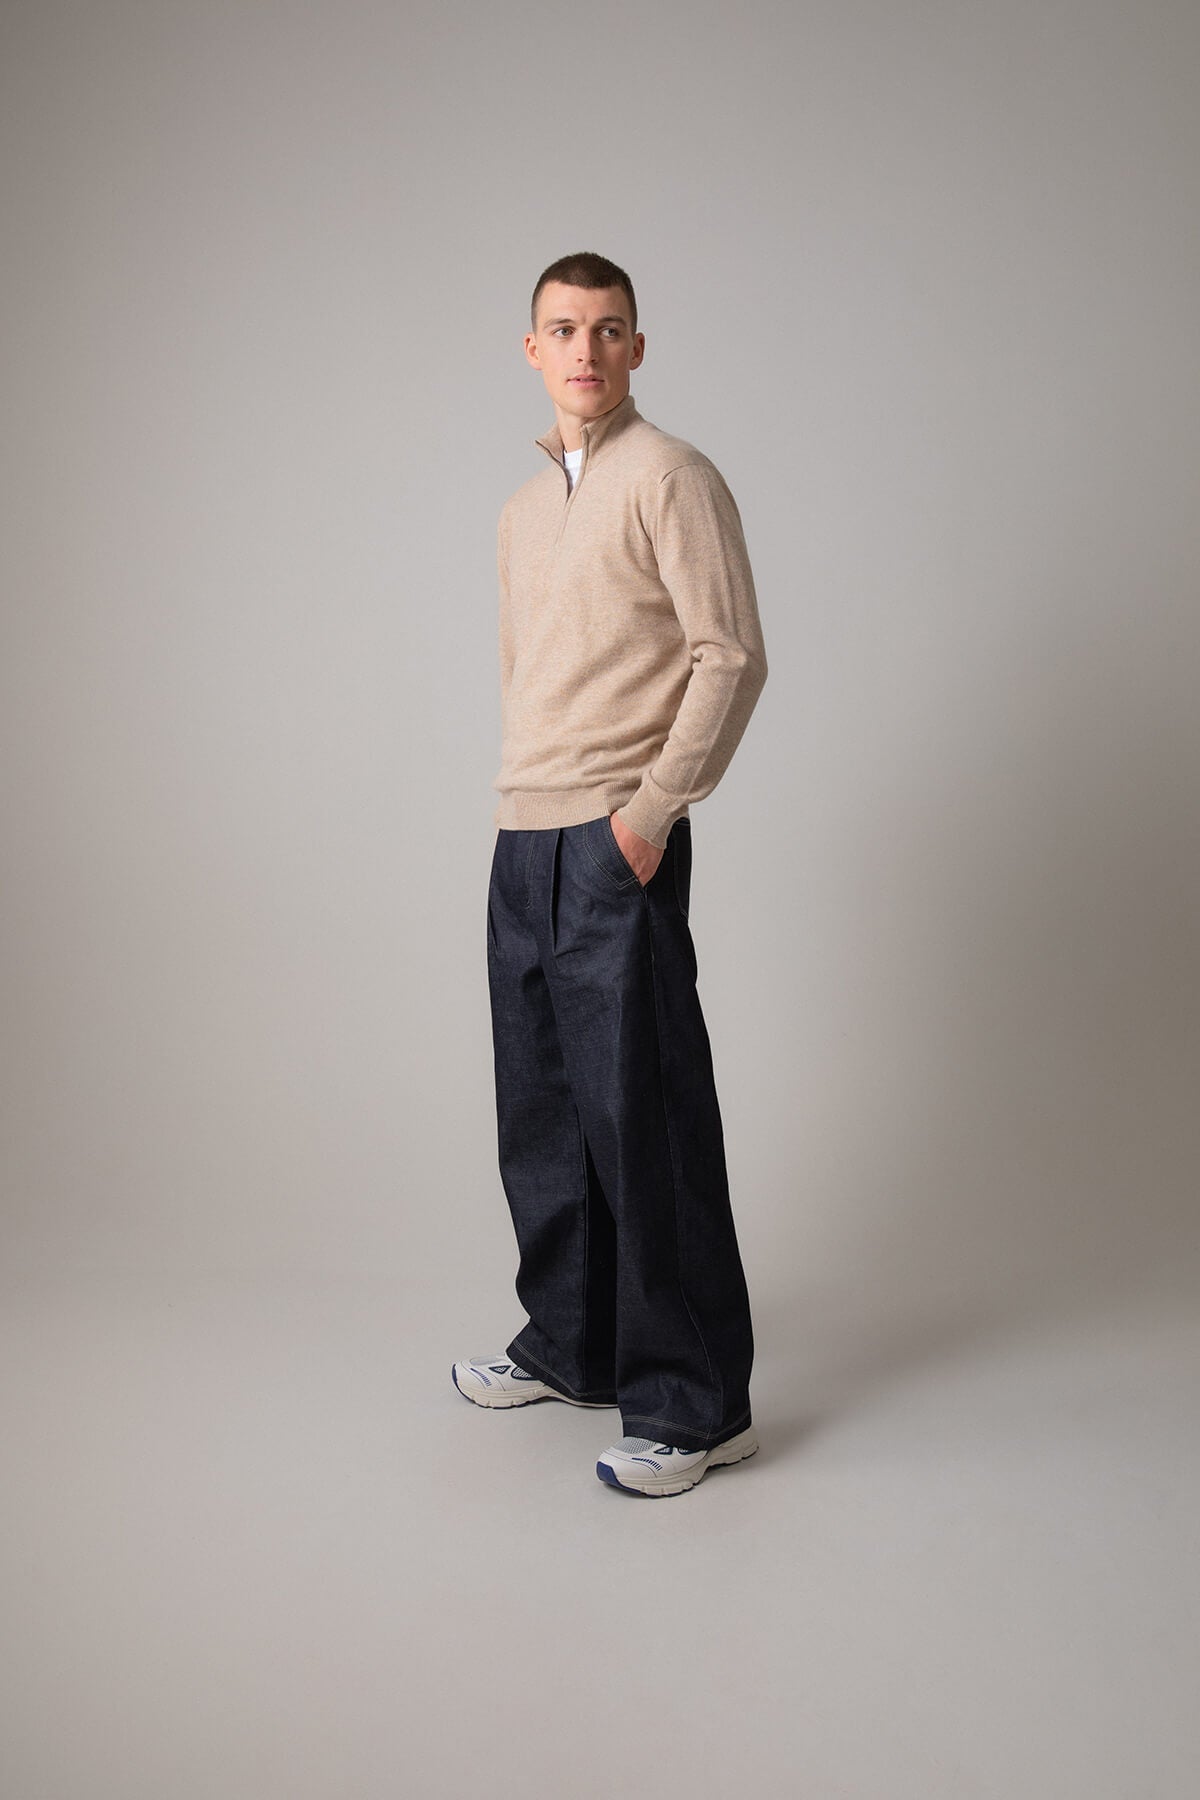 Johnstons of Elgin Men’s Cashmere Zip Neck Jumper in Oatmeal on model wearing navy trousers on grey background KAI05151HB0210